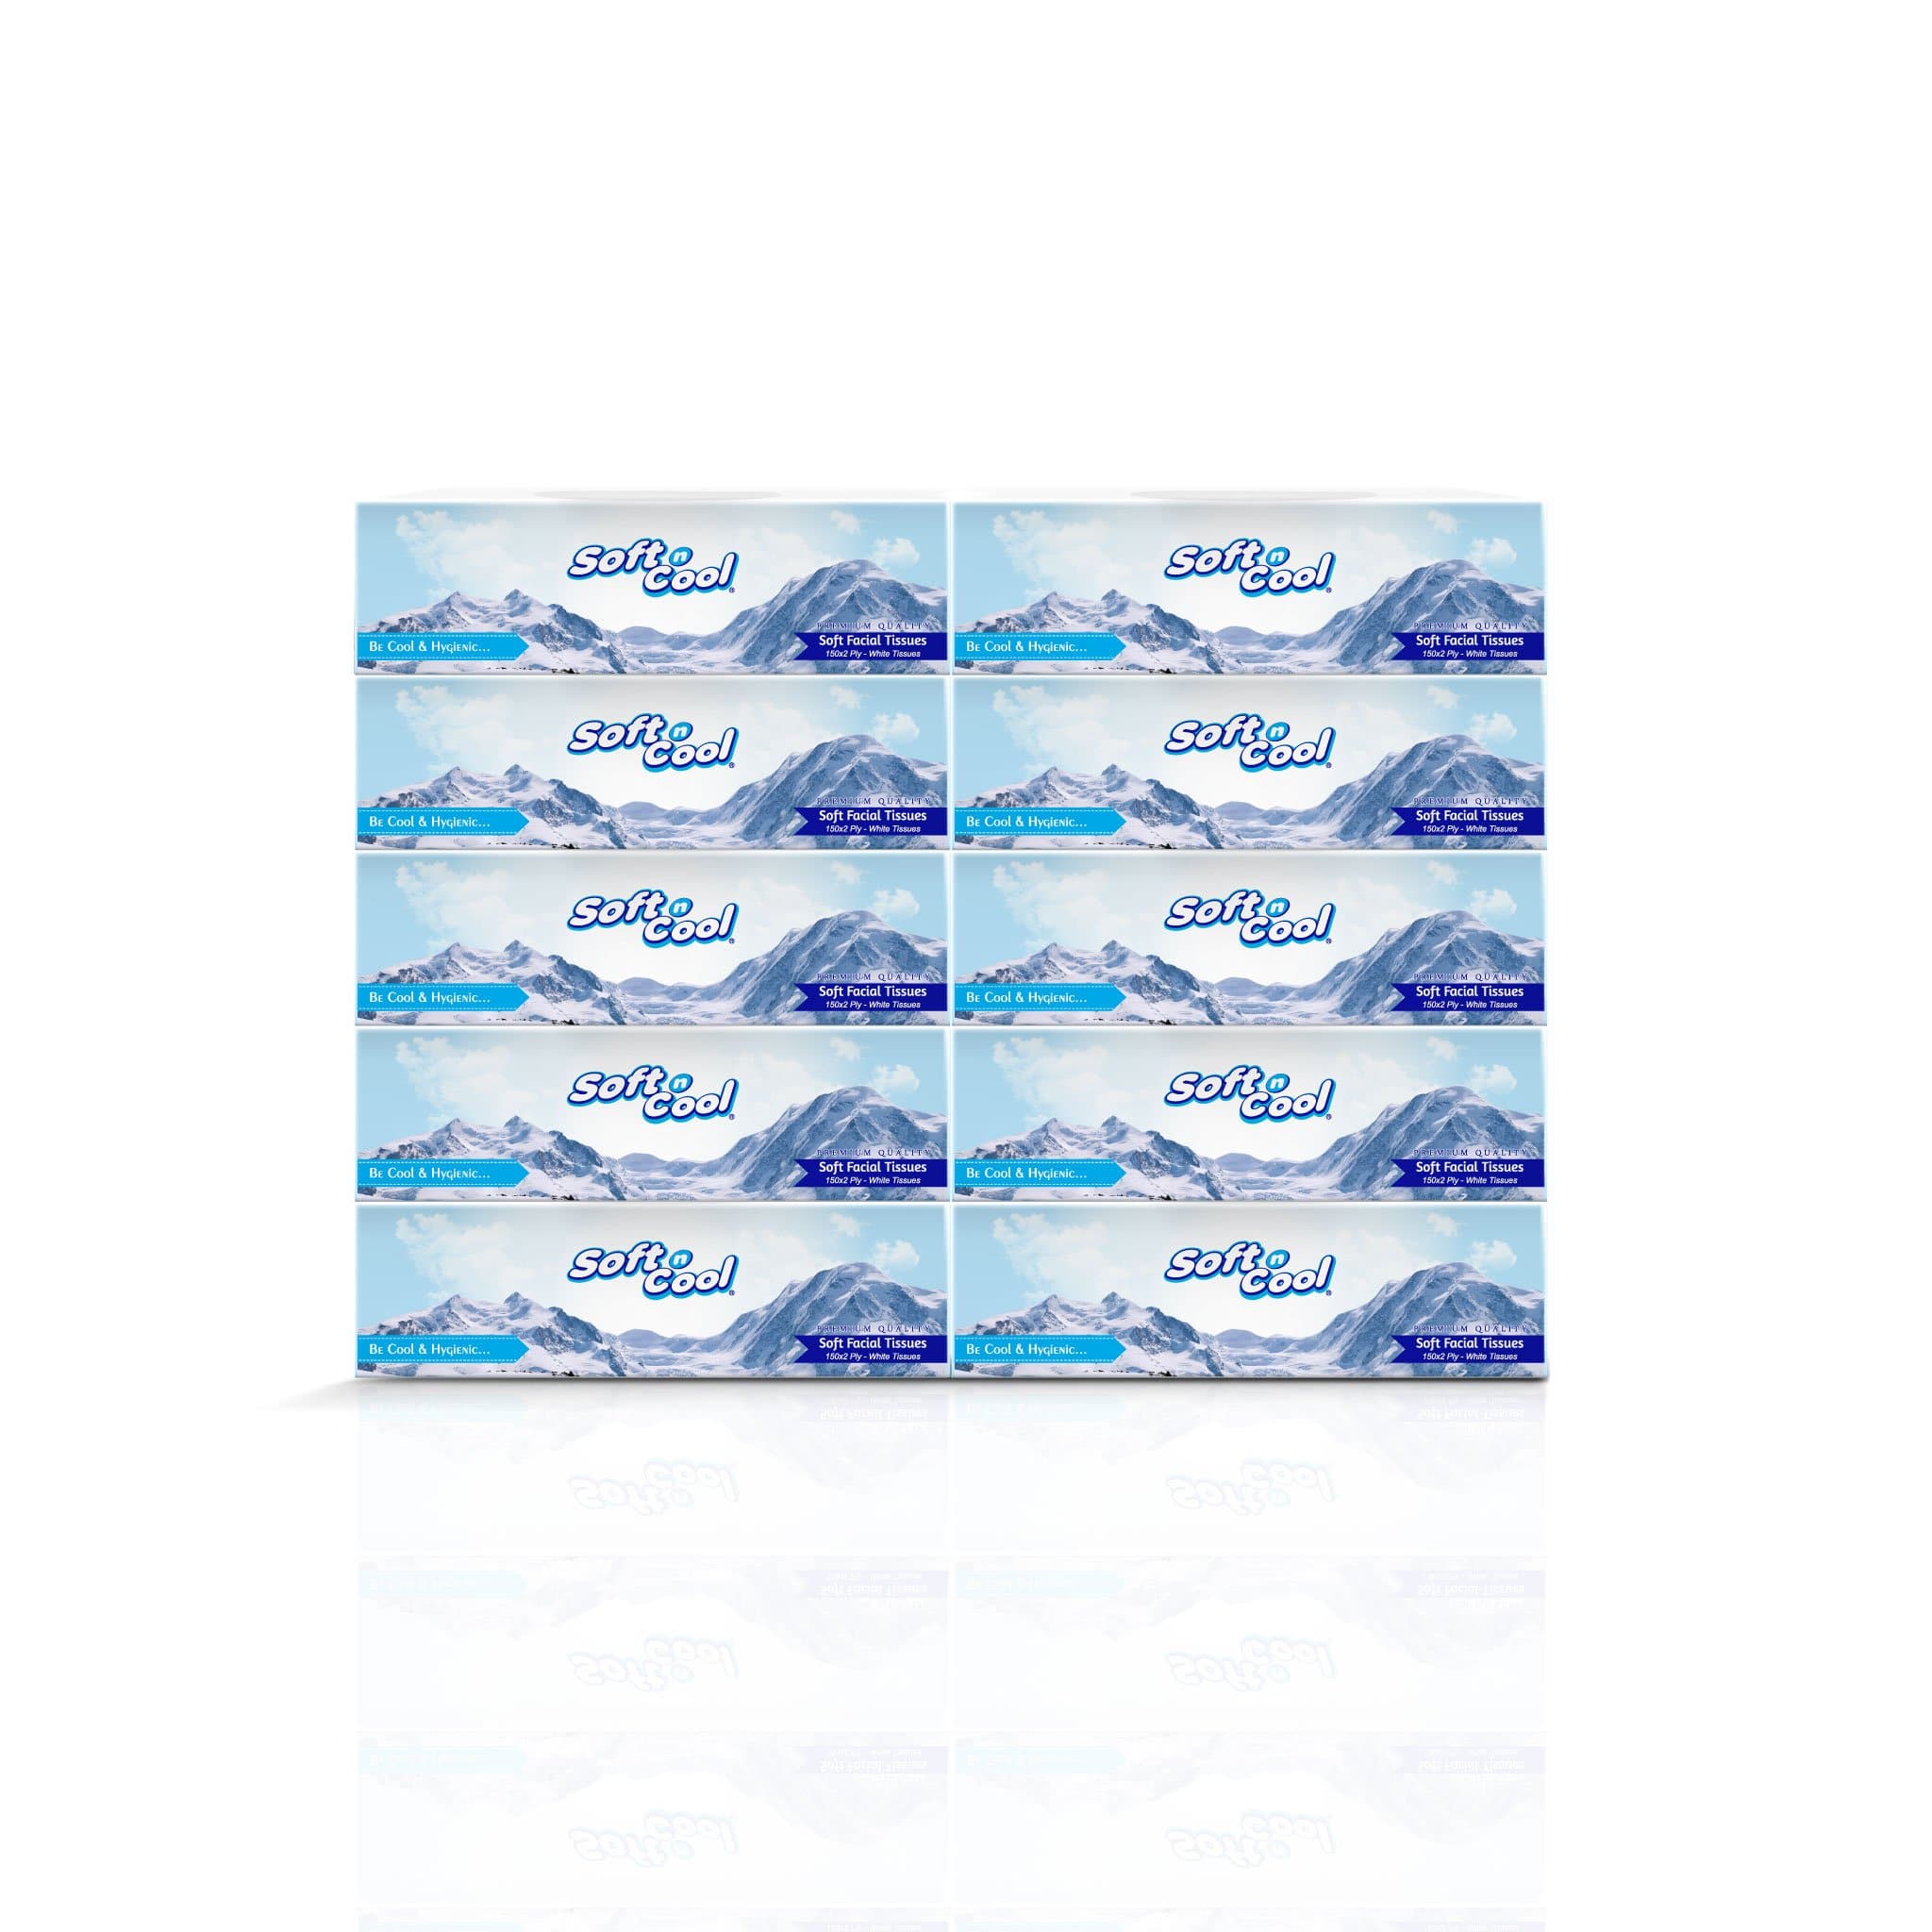 Hotpack | Soft N Cool Facial Tissue, 150 sheets| 30 boxes- Hotpack Bahrain 